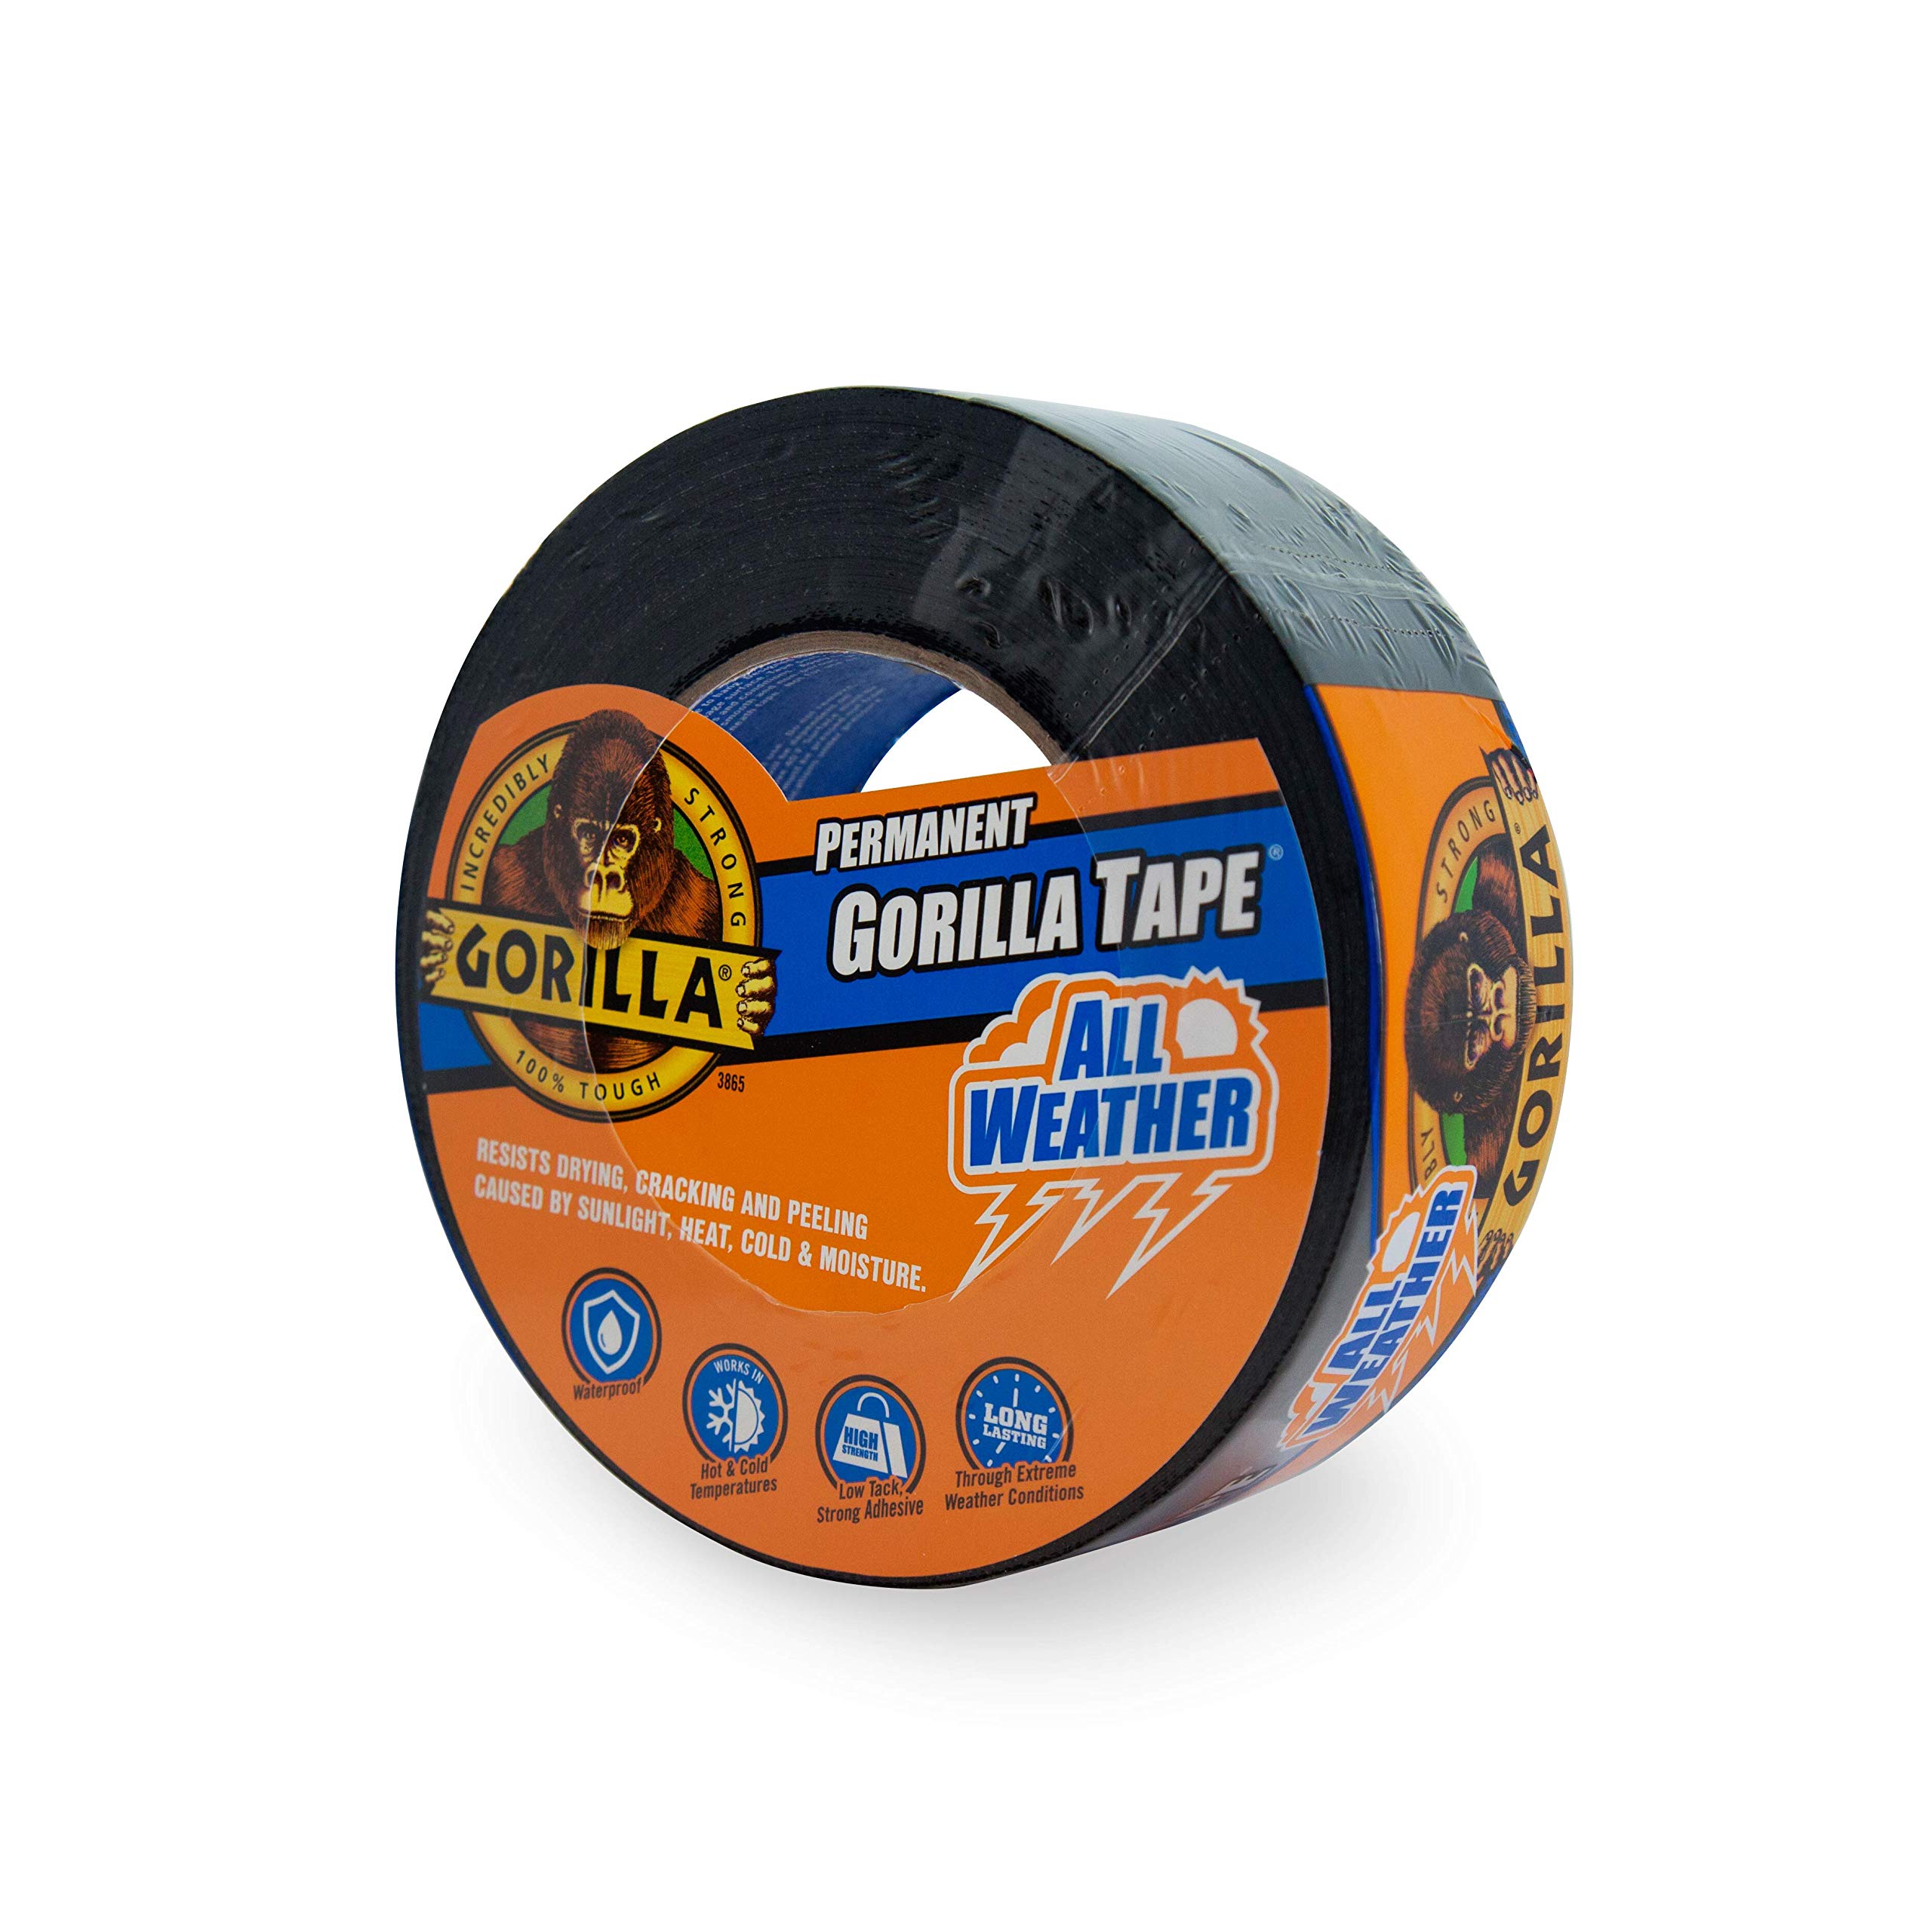 NEW Gorilla White Duct Tape, 1.88 x 30 yd, White, (Pack of 1) BEST  TAPE+STRONG